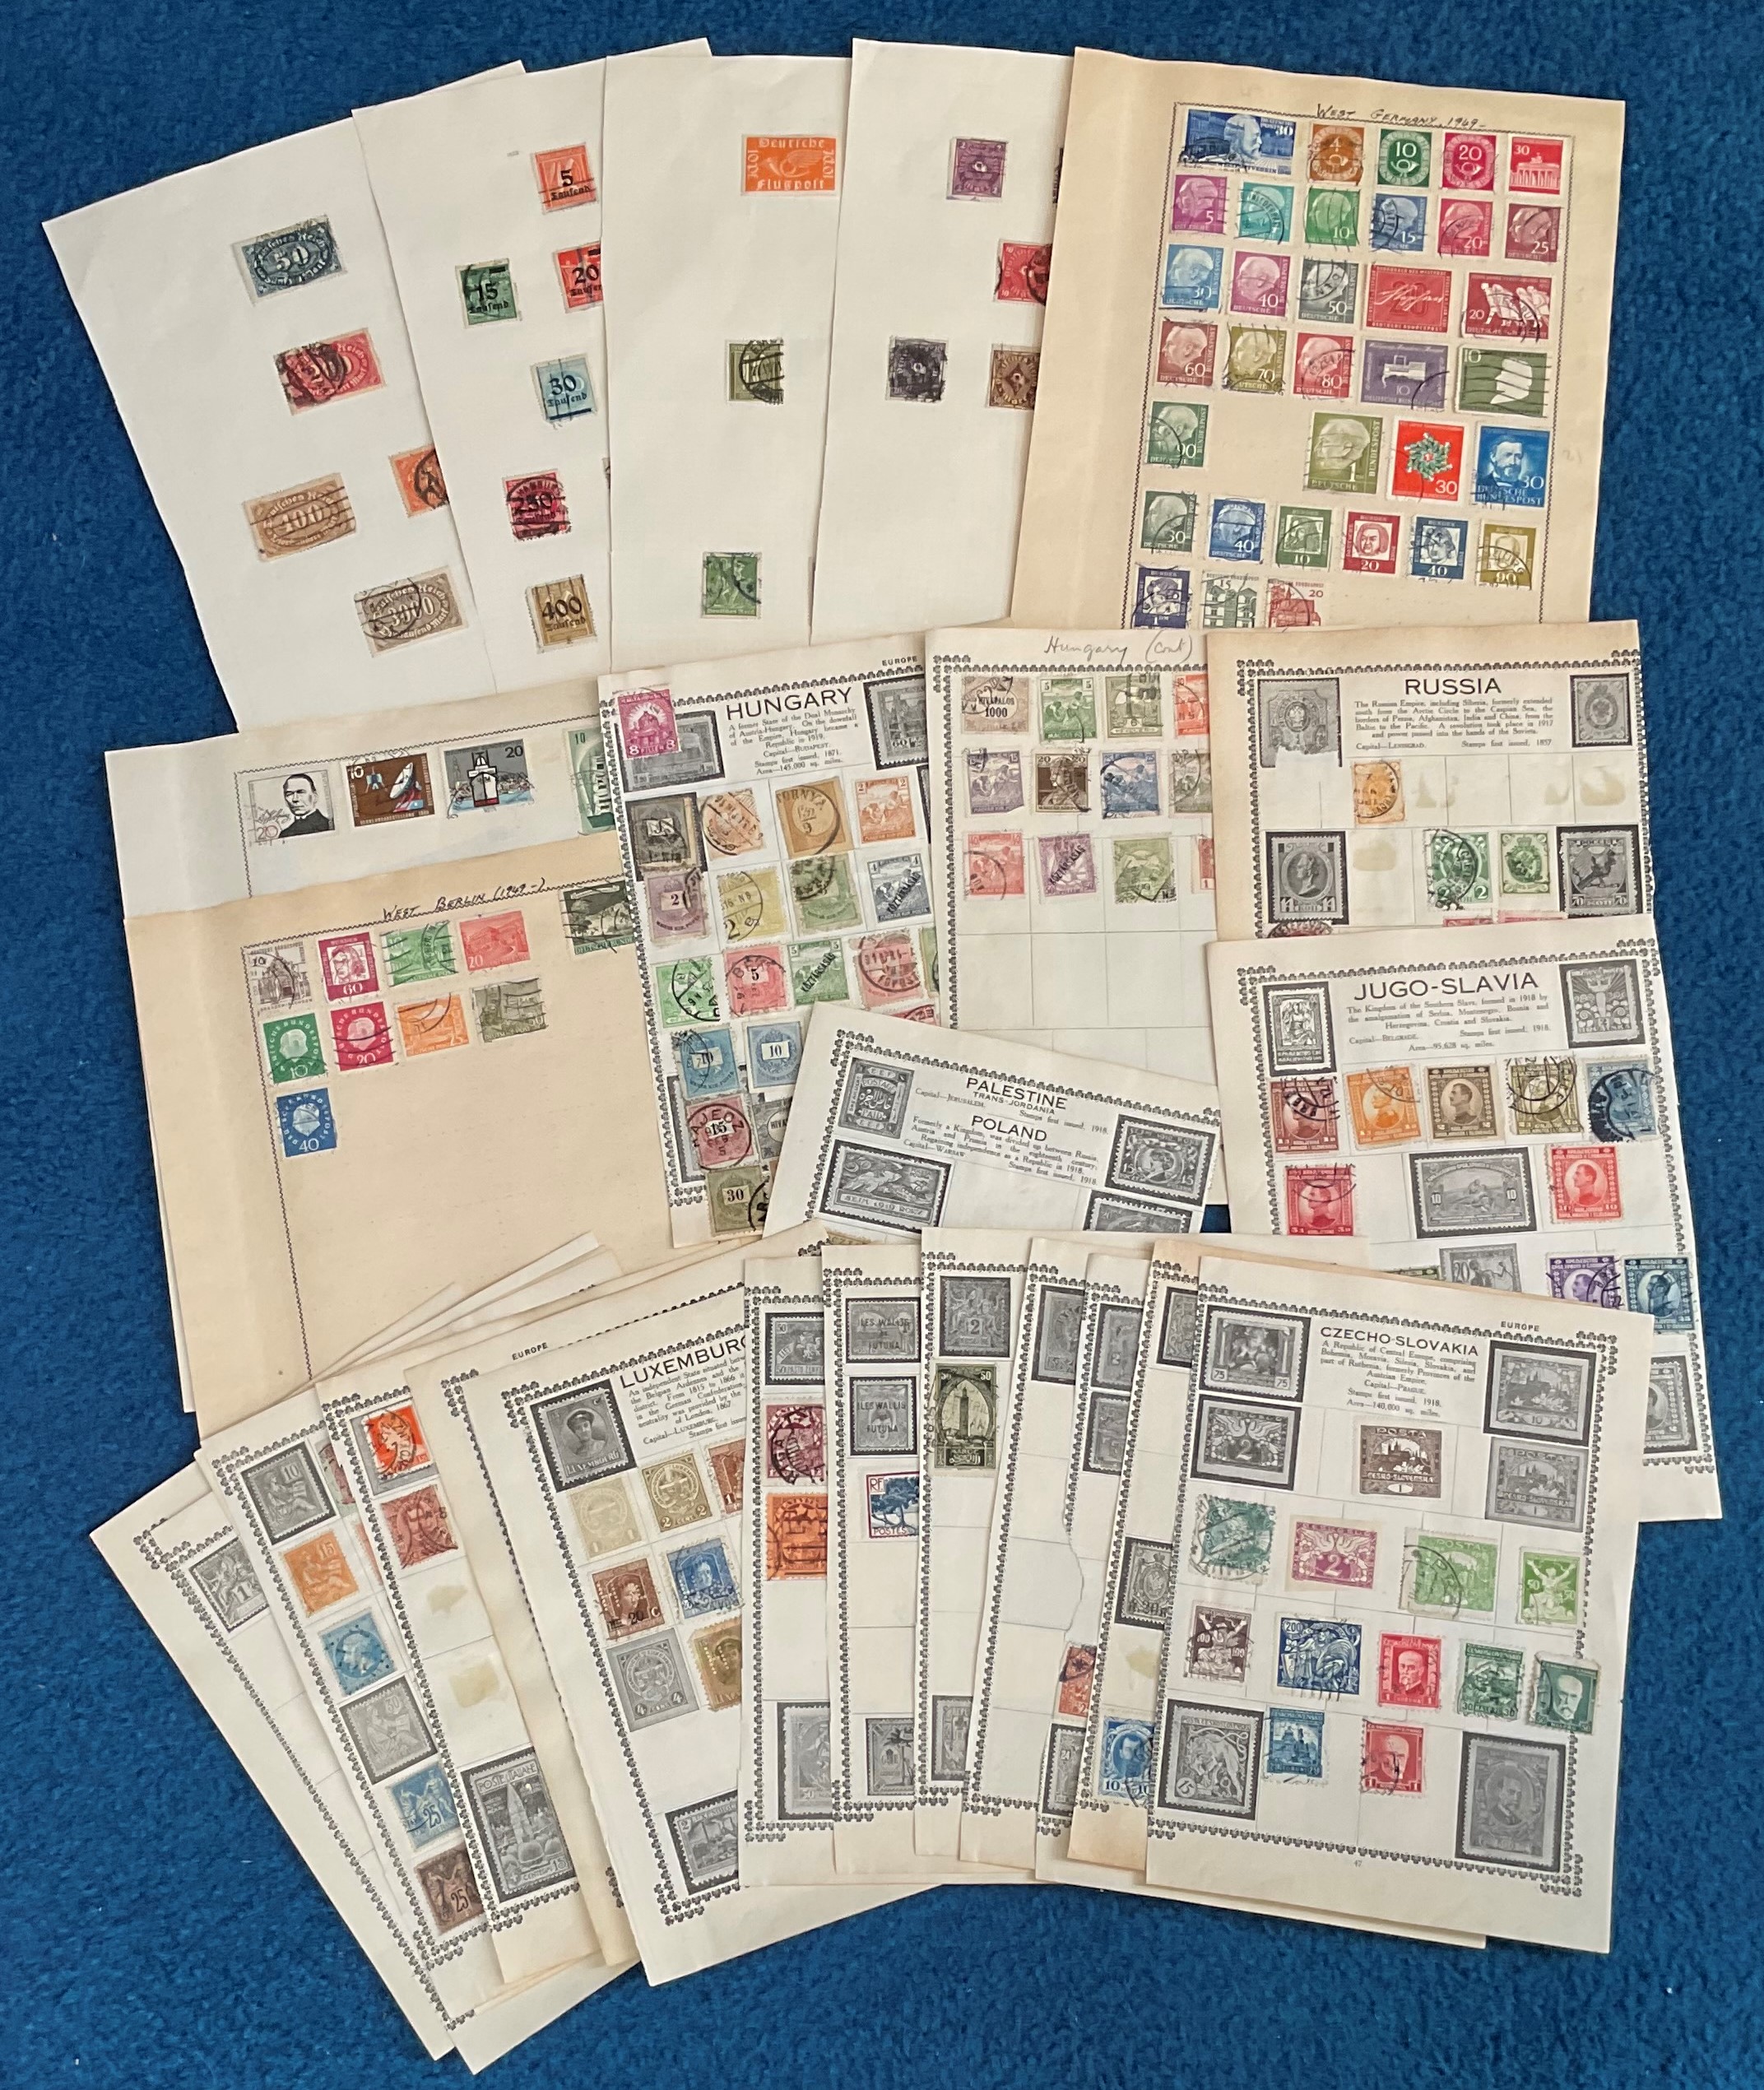 Europe stamp collection on loose album pages. Includes Germany, Yugoslavia, Poland, Russia, Italy